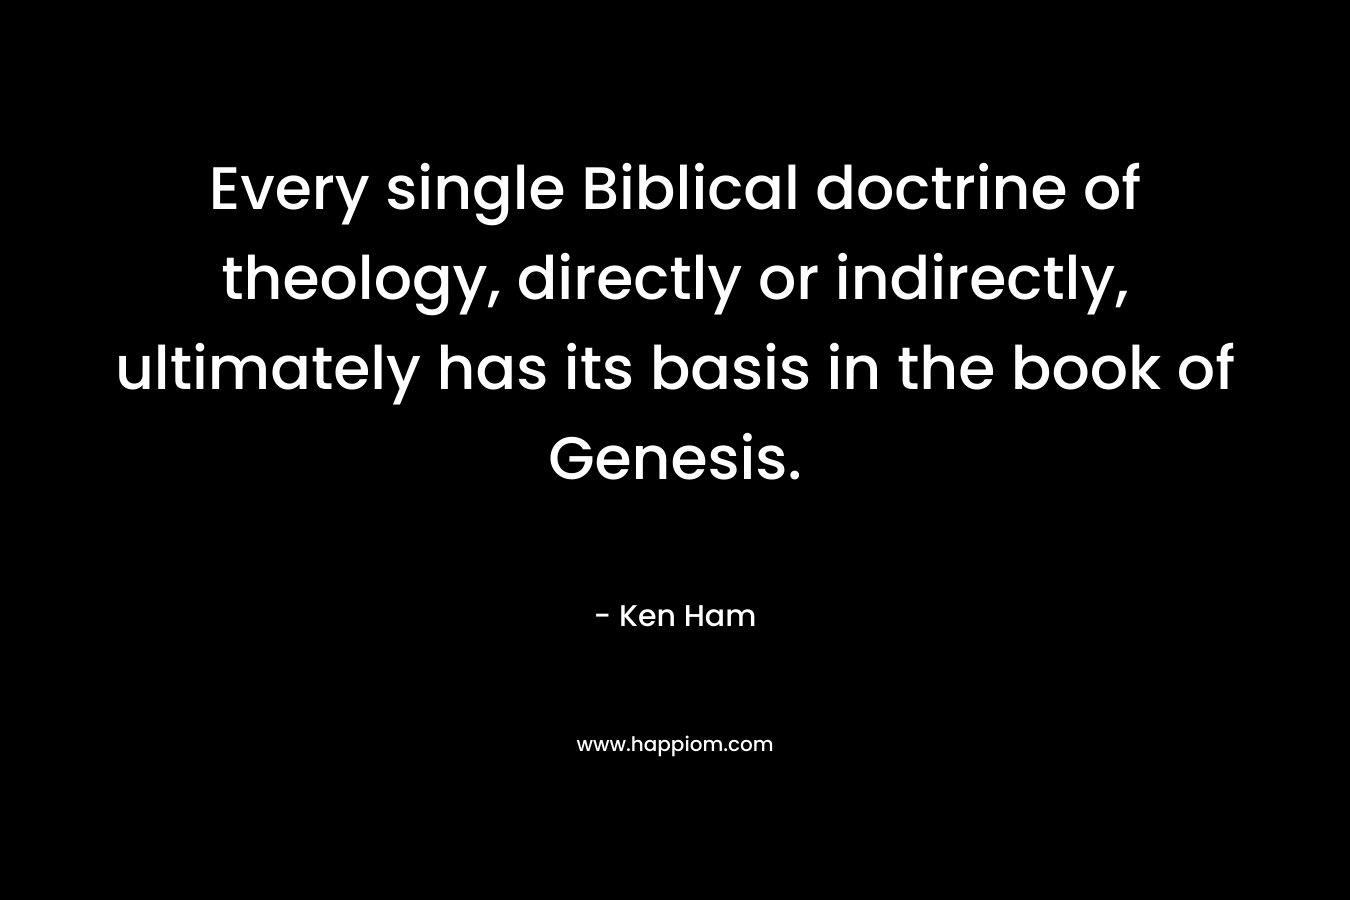 Every single Biblical doctrine of theology, directly or indirectly, ultimately has its basis in the book of Genesis. – Ken Ham